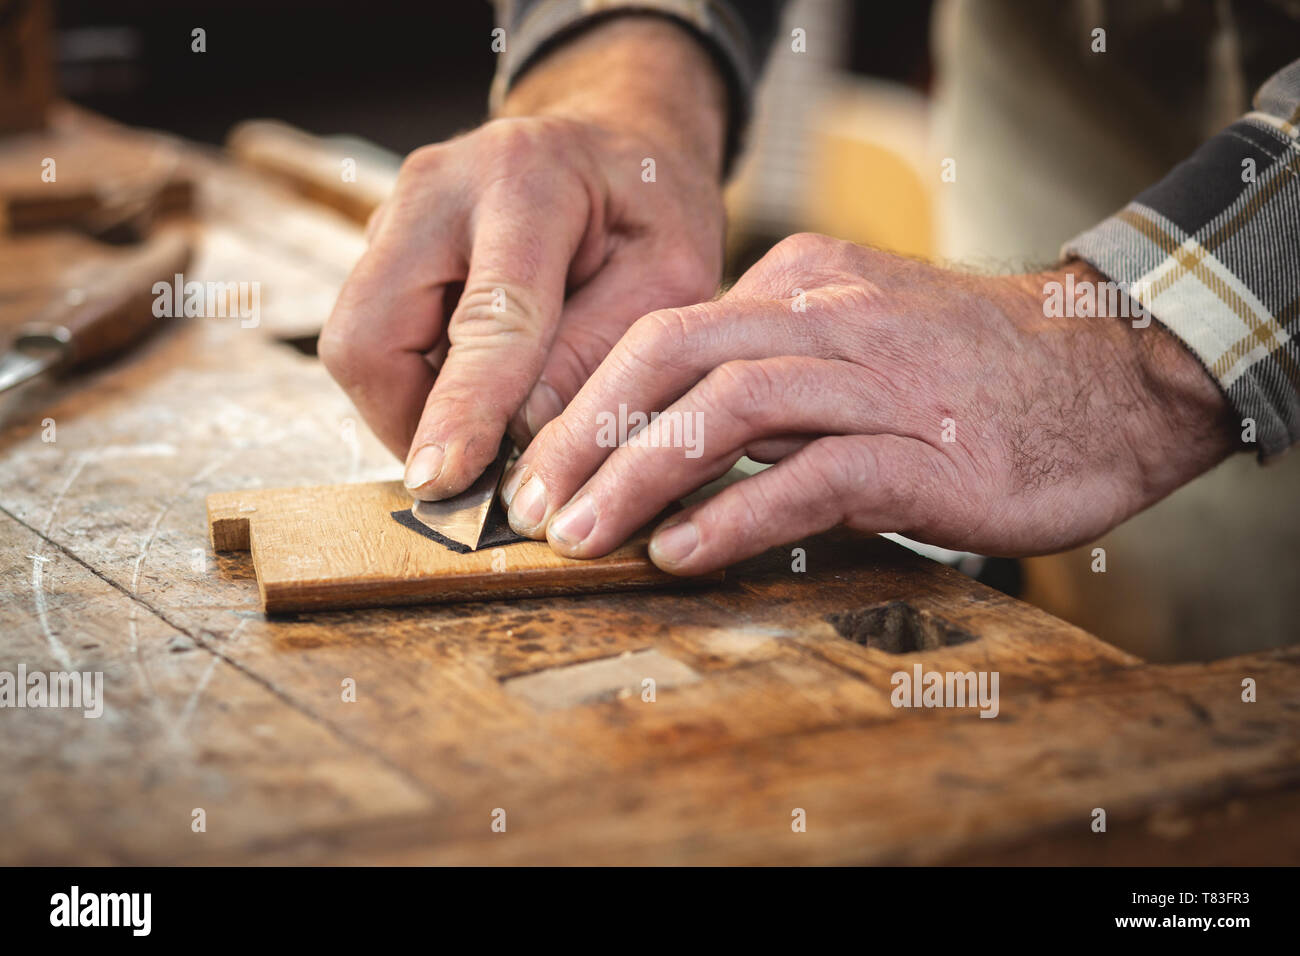 Hands of a craftsman cutting a small piece of leather Stock Photo